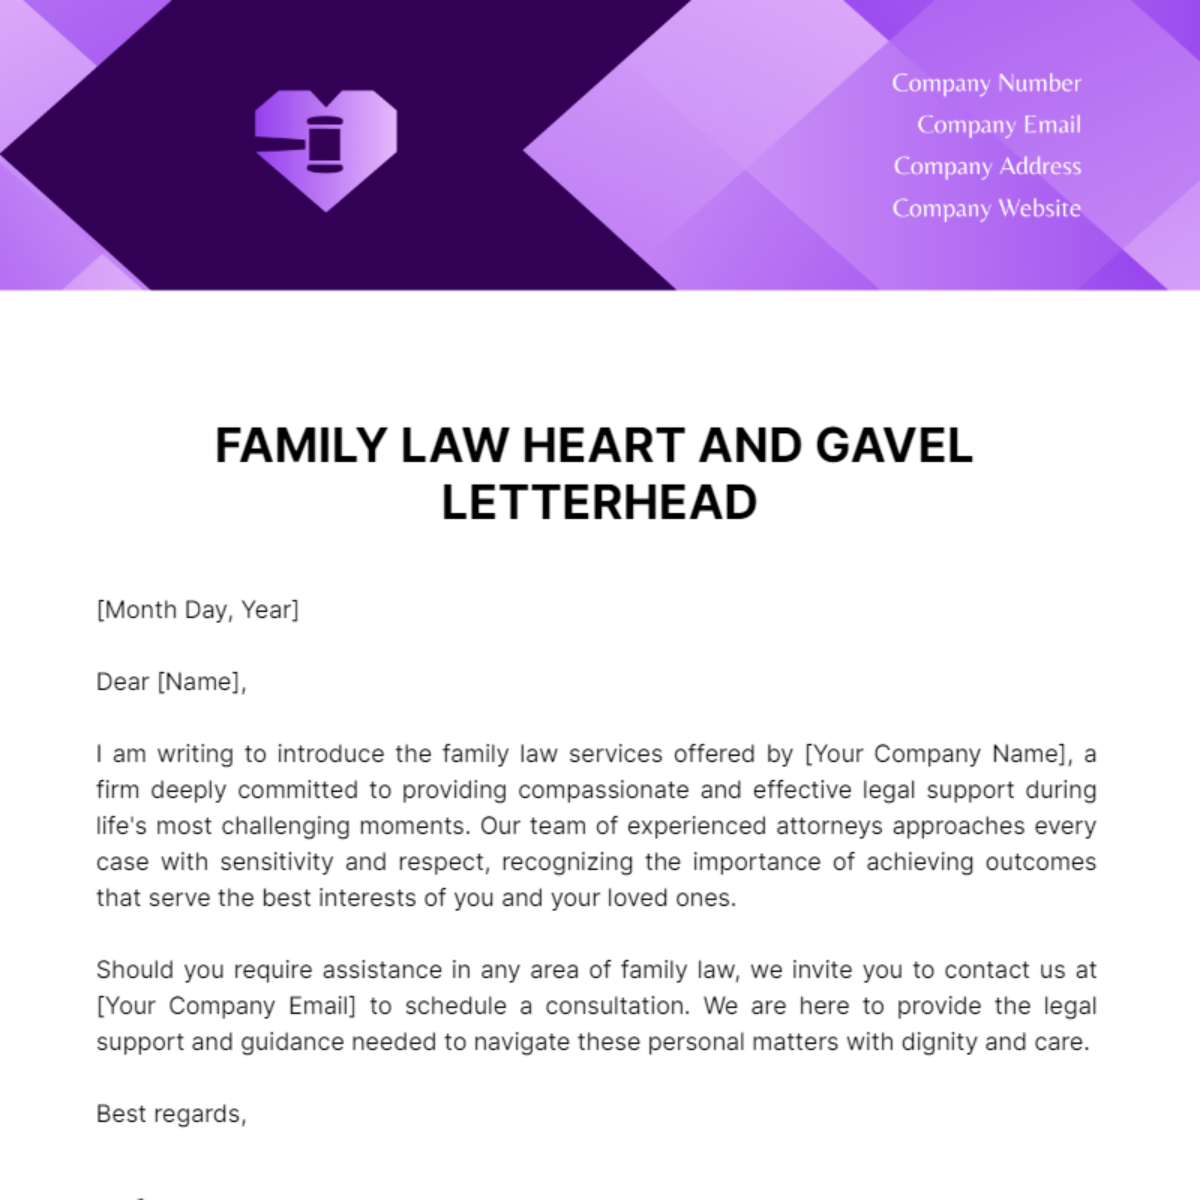 Free Family Law Heart and Gavel Letterhead Template